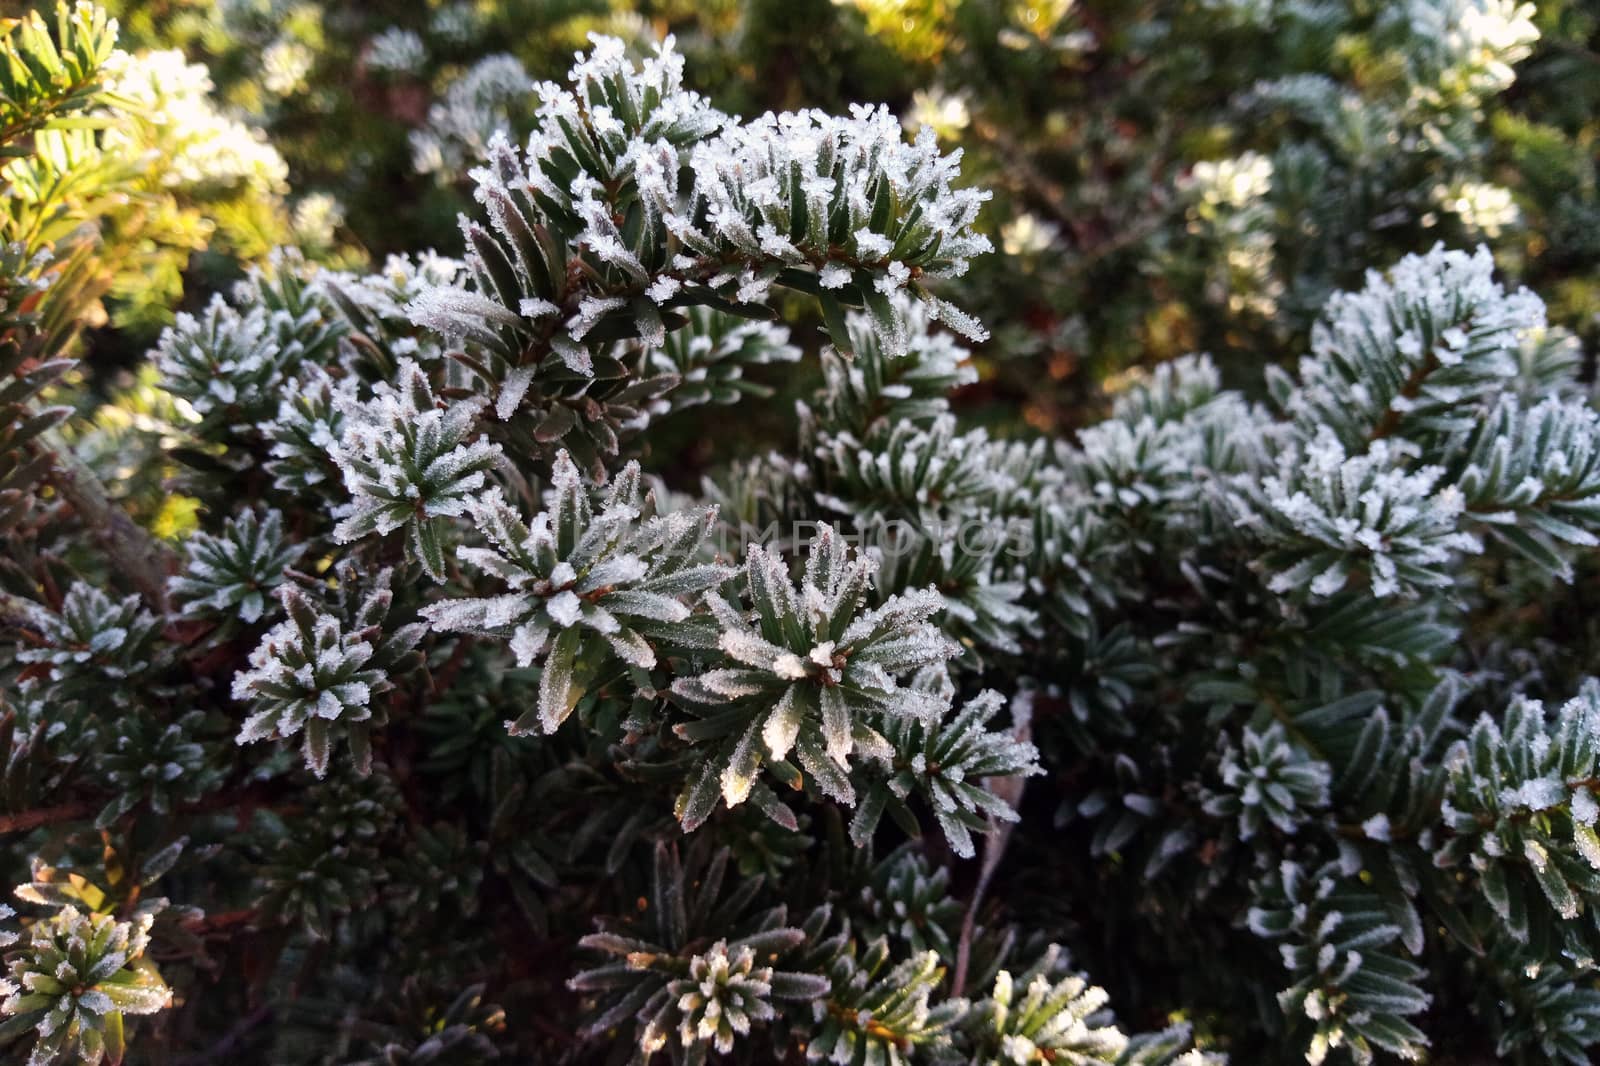 The plant is covered with ice on a frosty cold morning. by kip02kas